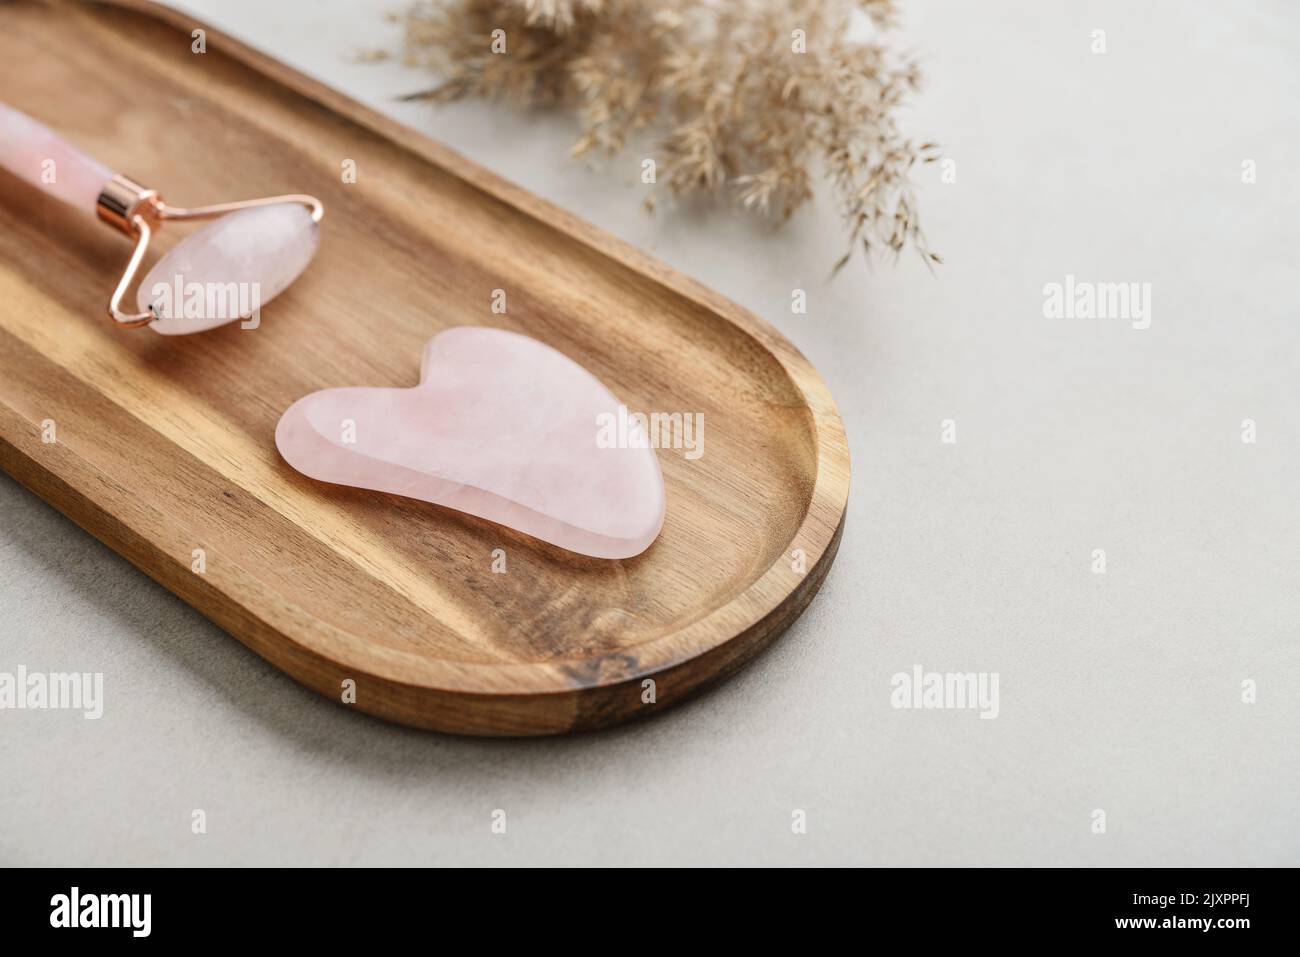 Facial rose quartz stone massage roller and gua sha massager made from natural stone on light concrete background, top view Stock Photo